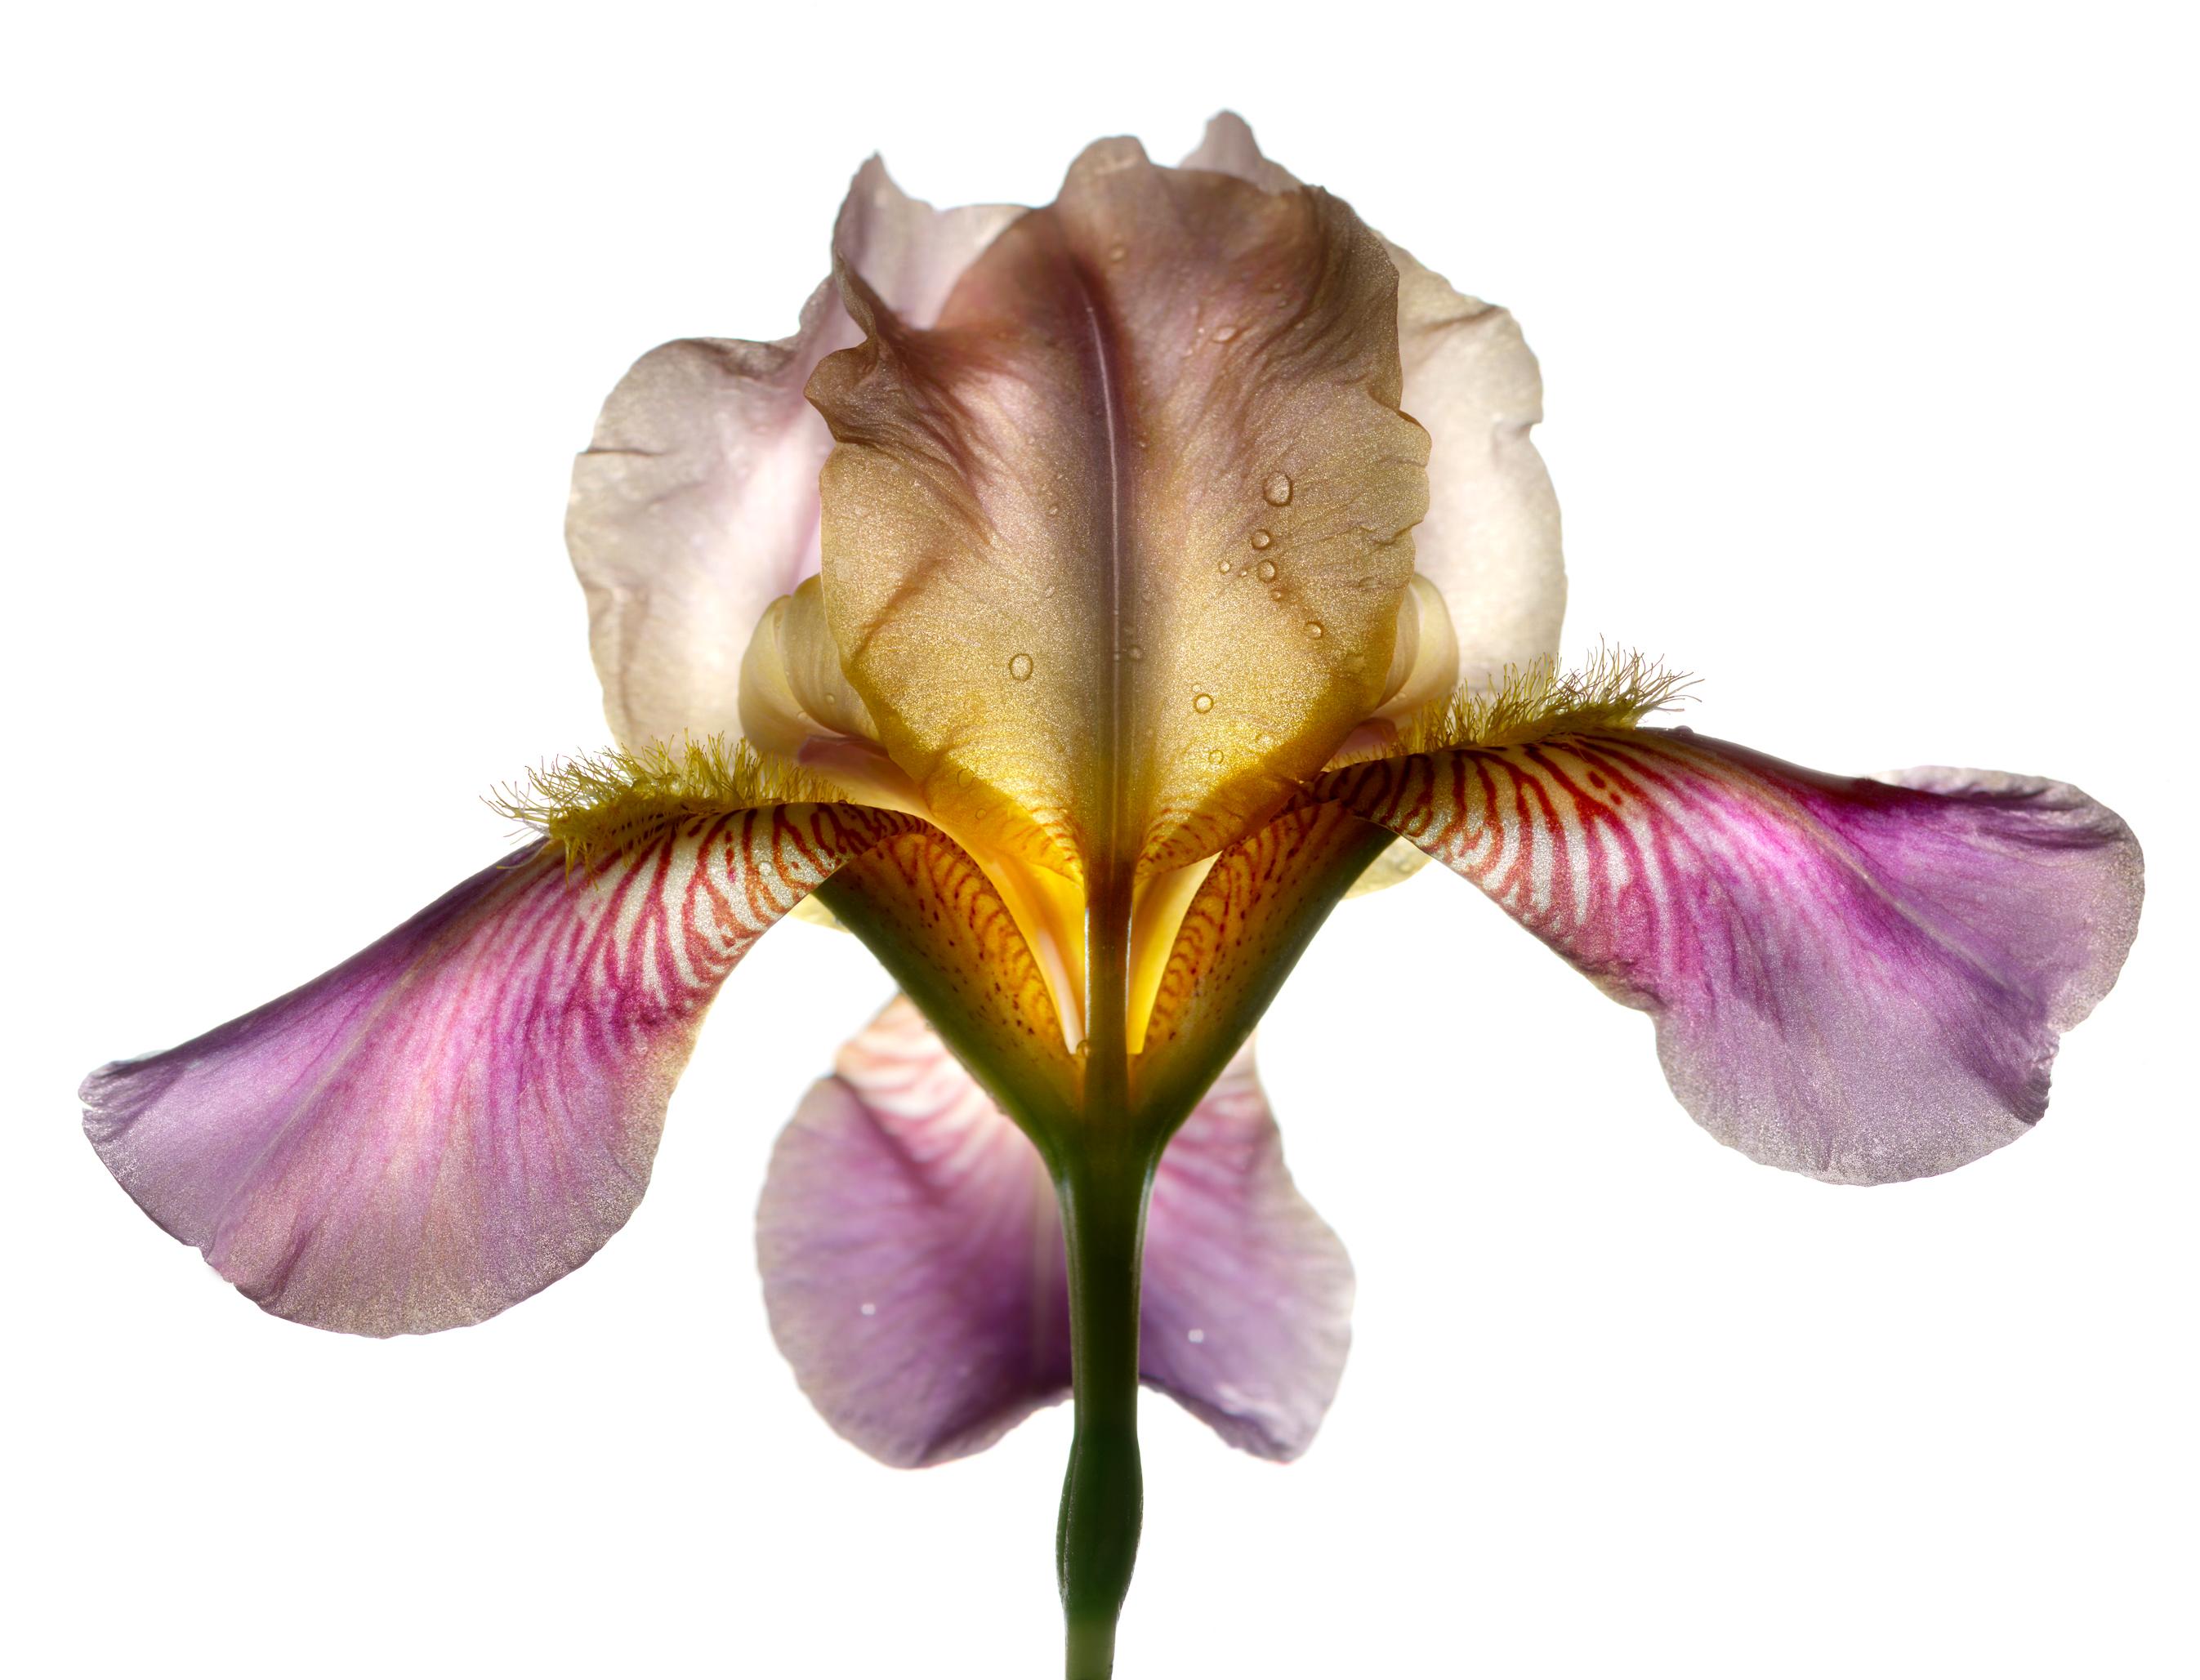 Chad Kleitsch Color Photograph - No. 94 (Framed Still Life Photograph of a Light Purple Iris Flower on White) 